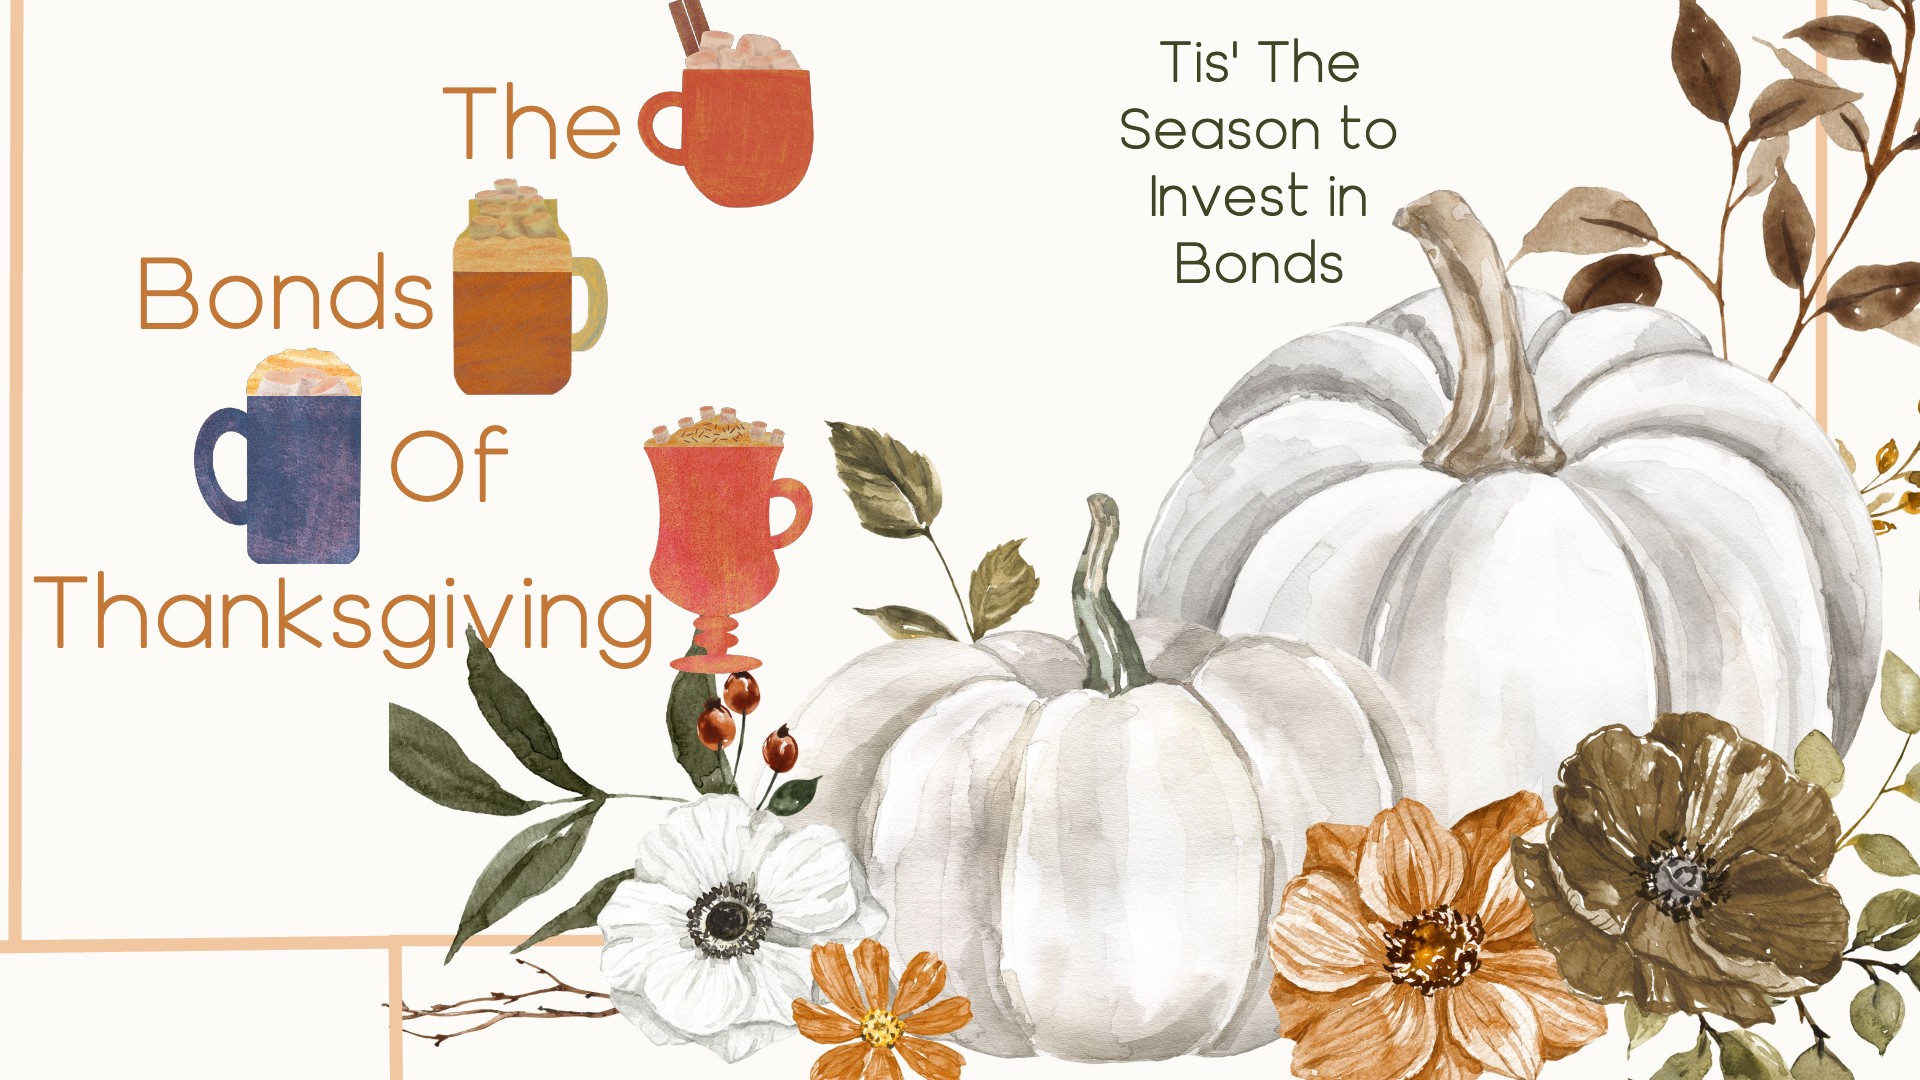 The Bonds of Thanksgiving: Tis’ The Season to Invest in Bonds